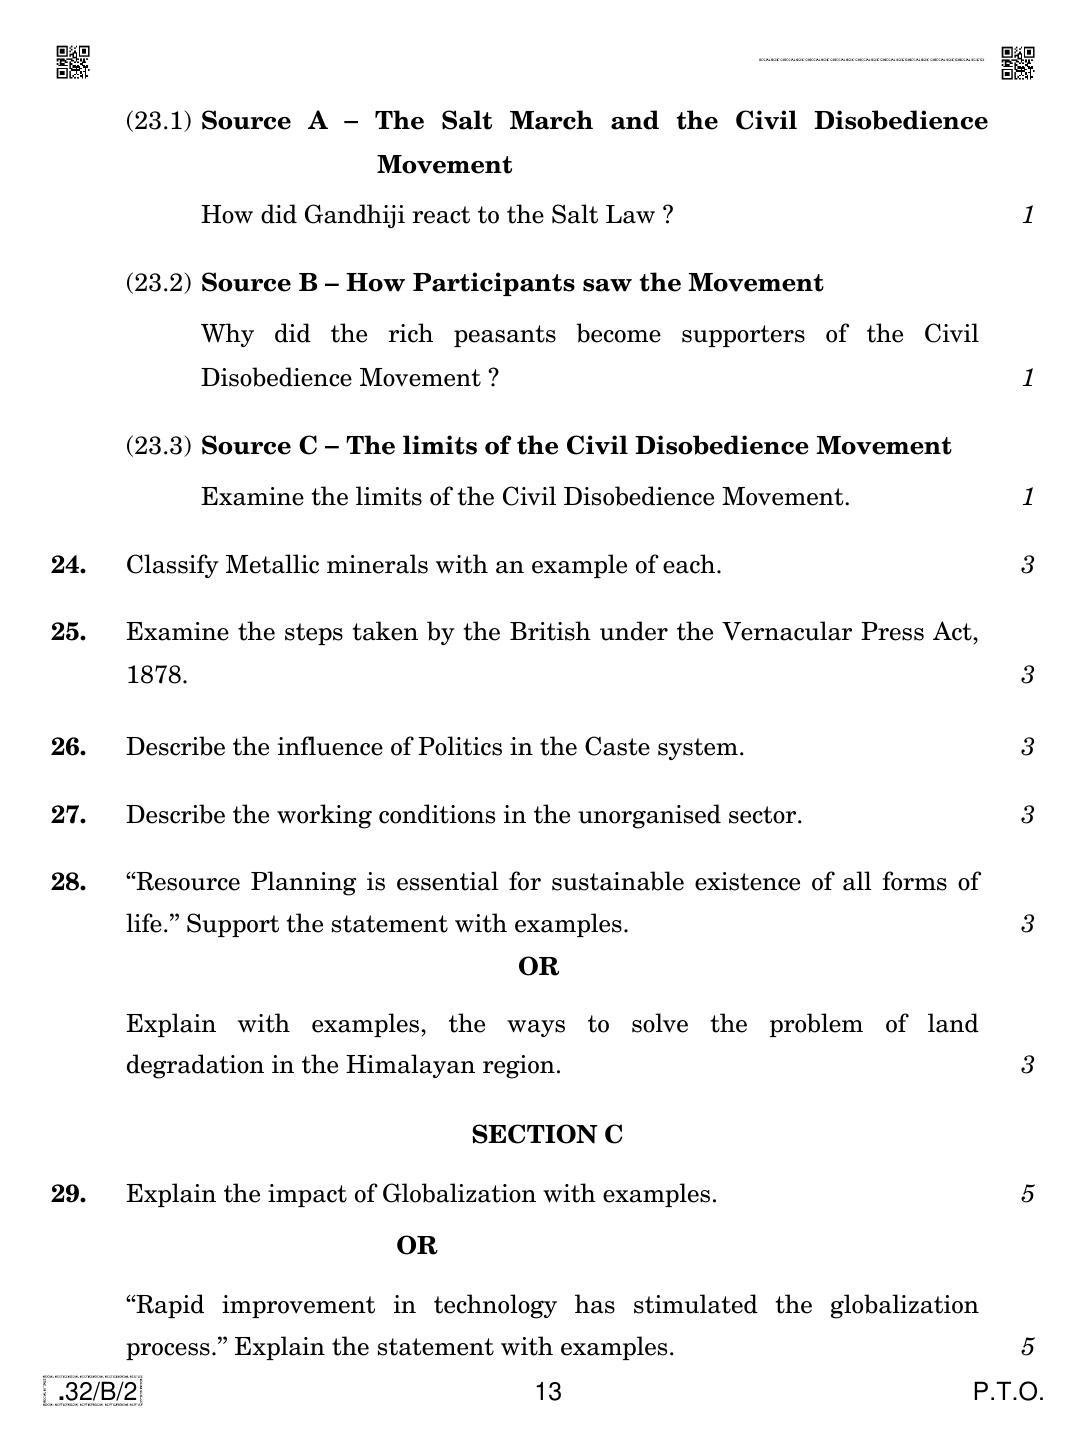 CBSE Class 10 32-C-2 Social Science 2020 Compartment Question Paper - Page 13